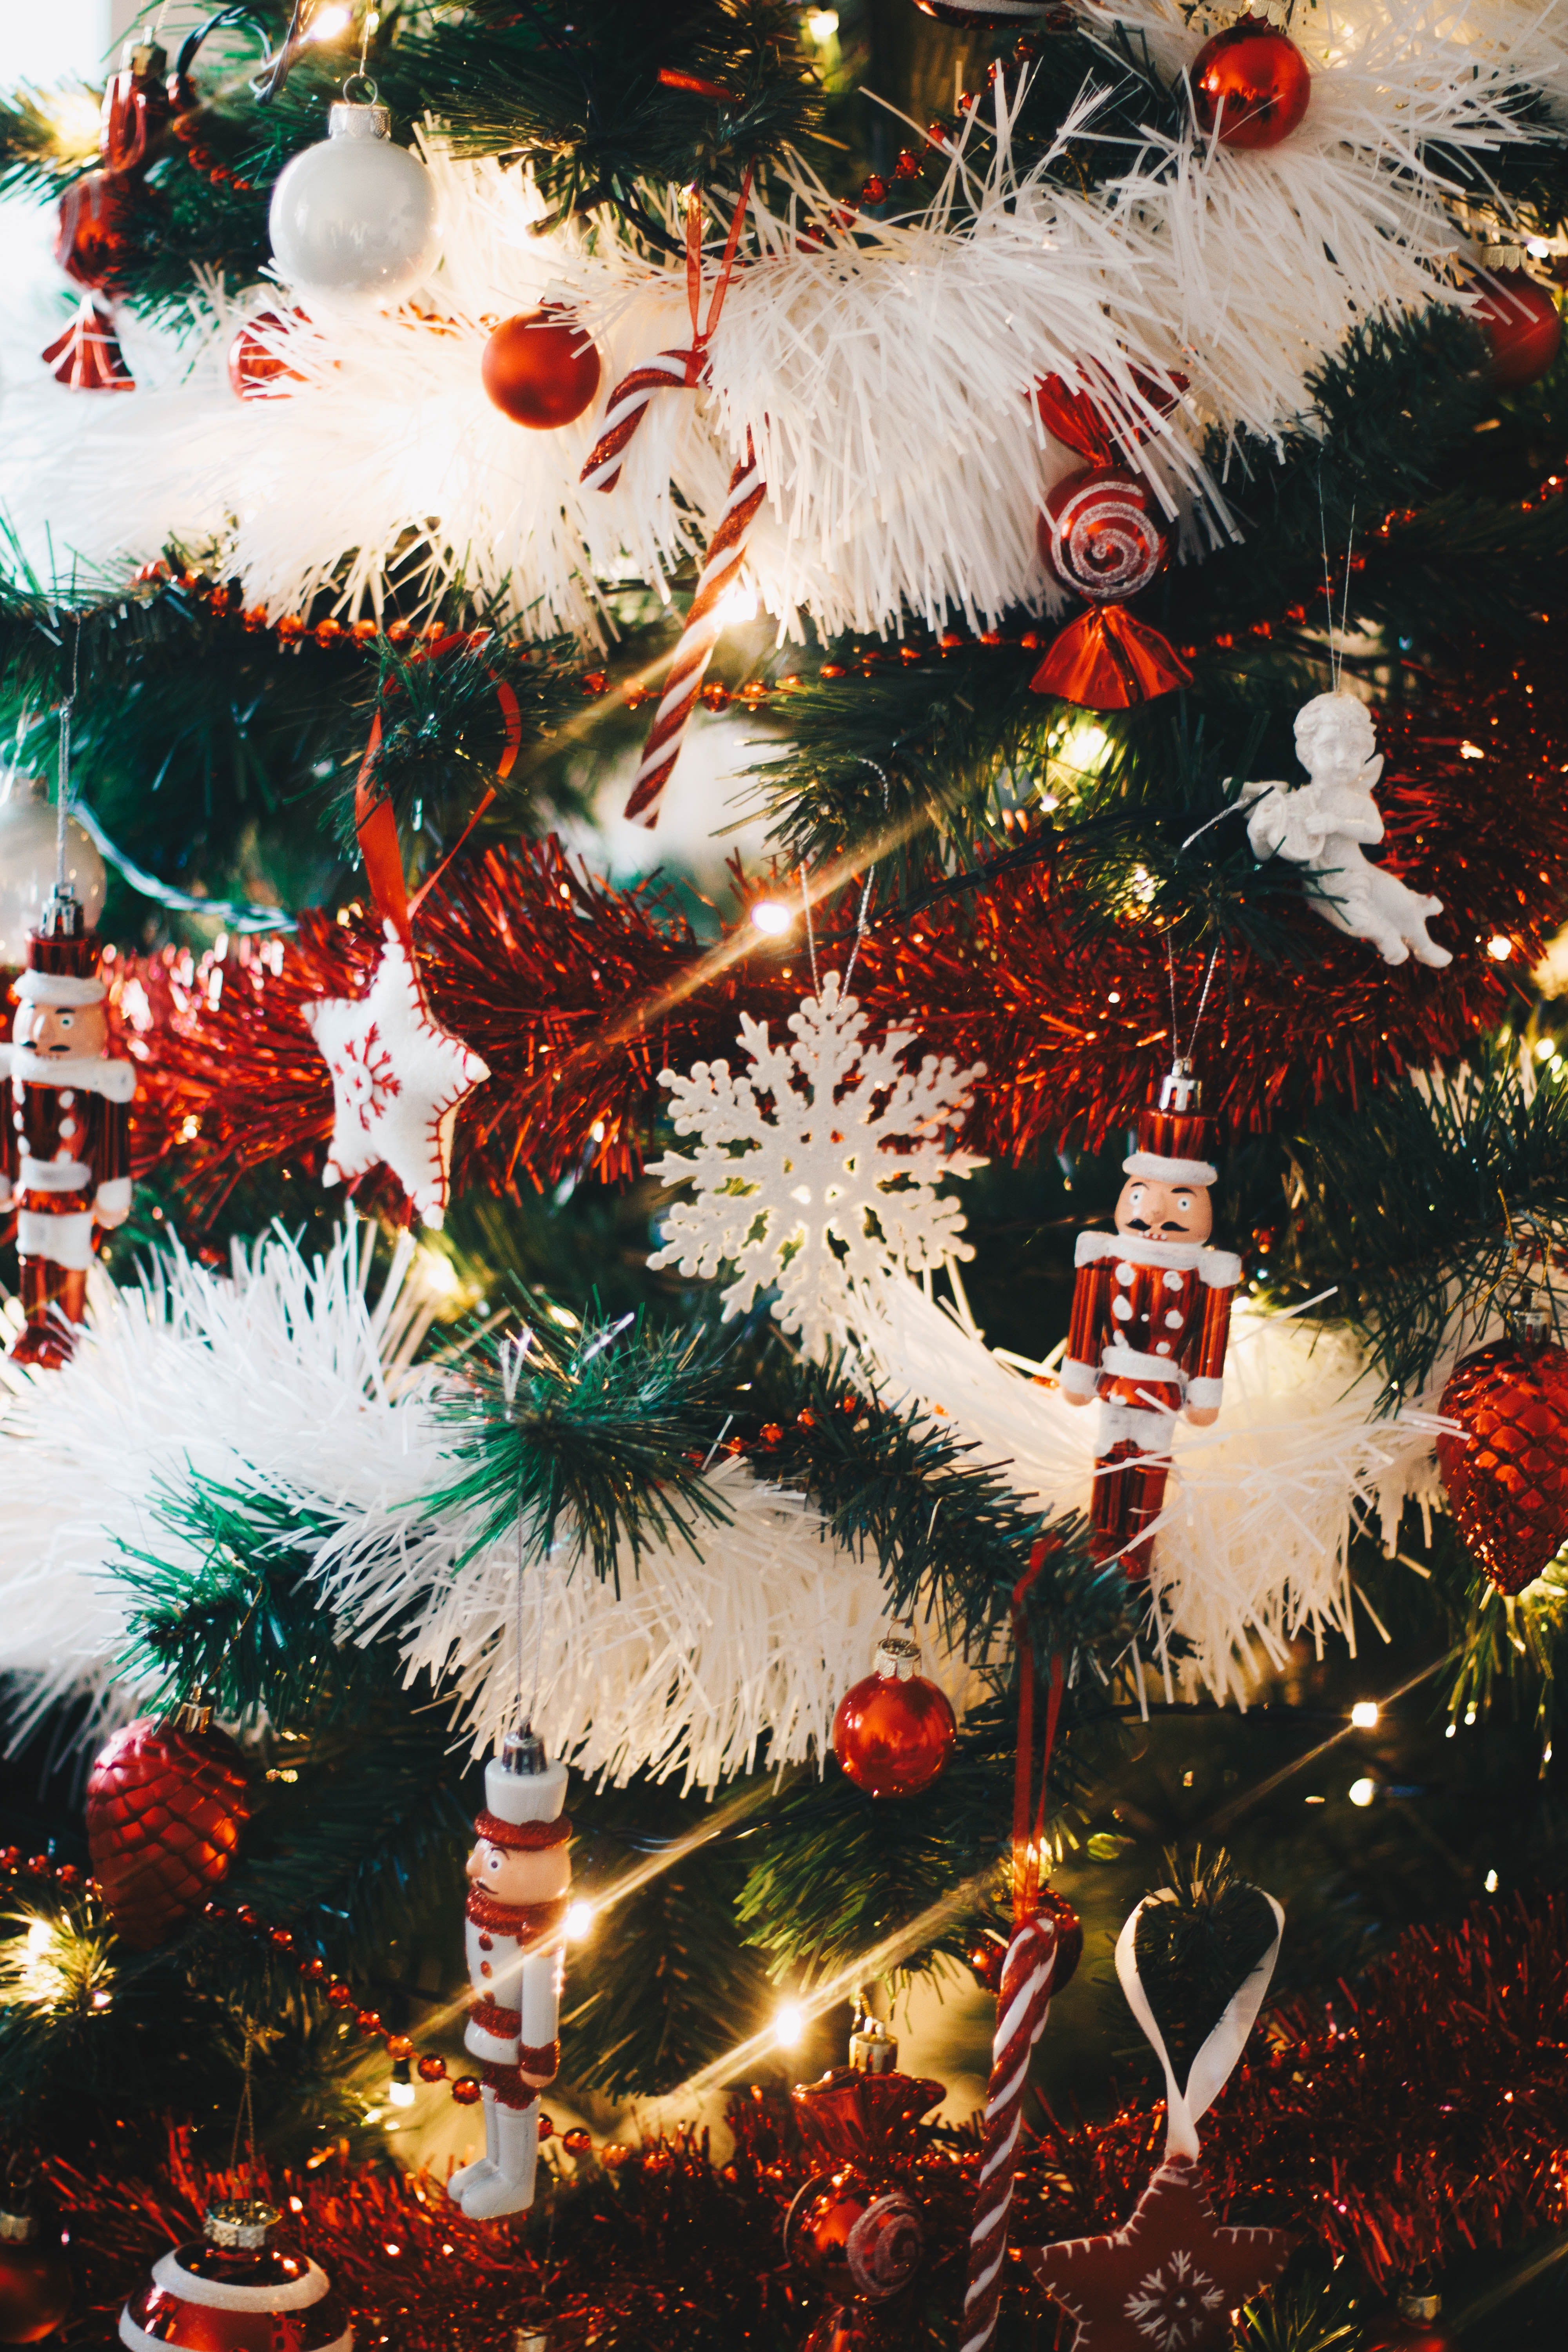 A close up view of decorations on a Christmas tree. | Source: Pexels.